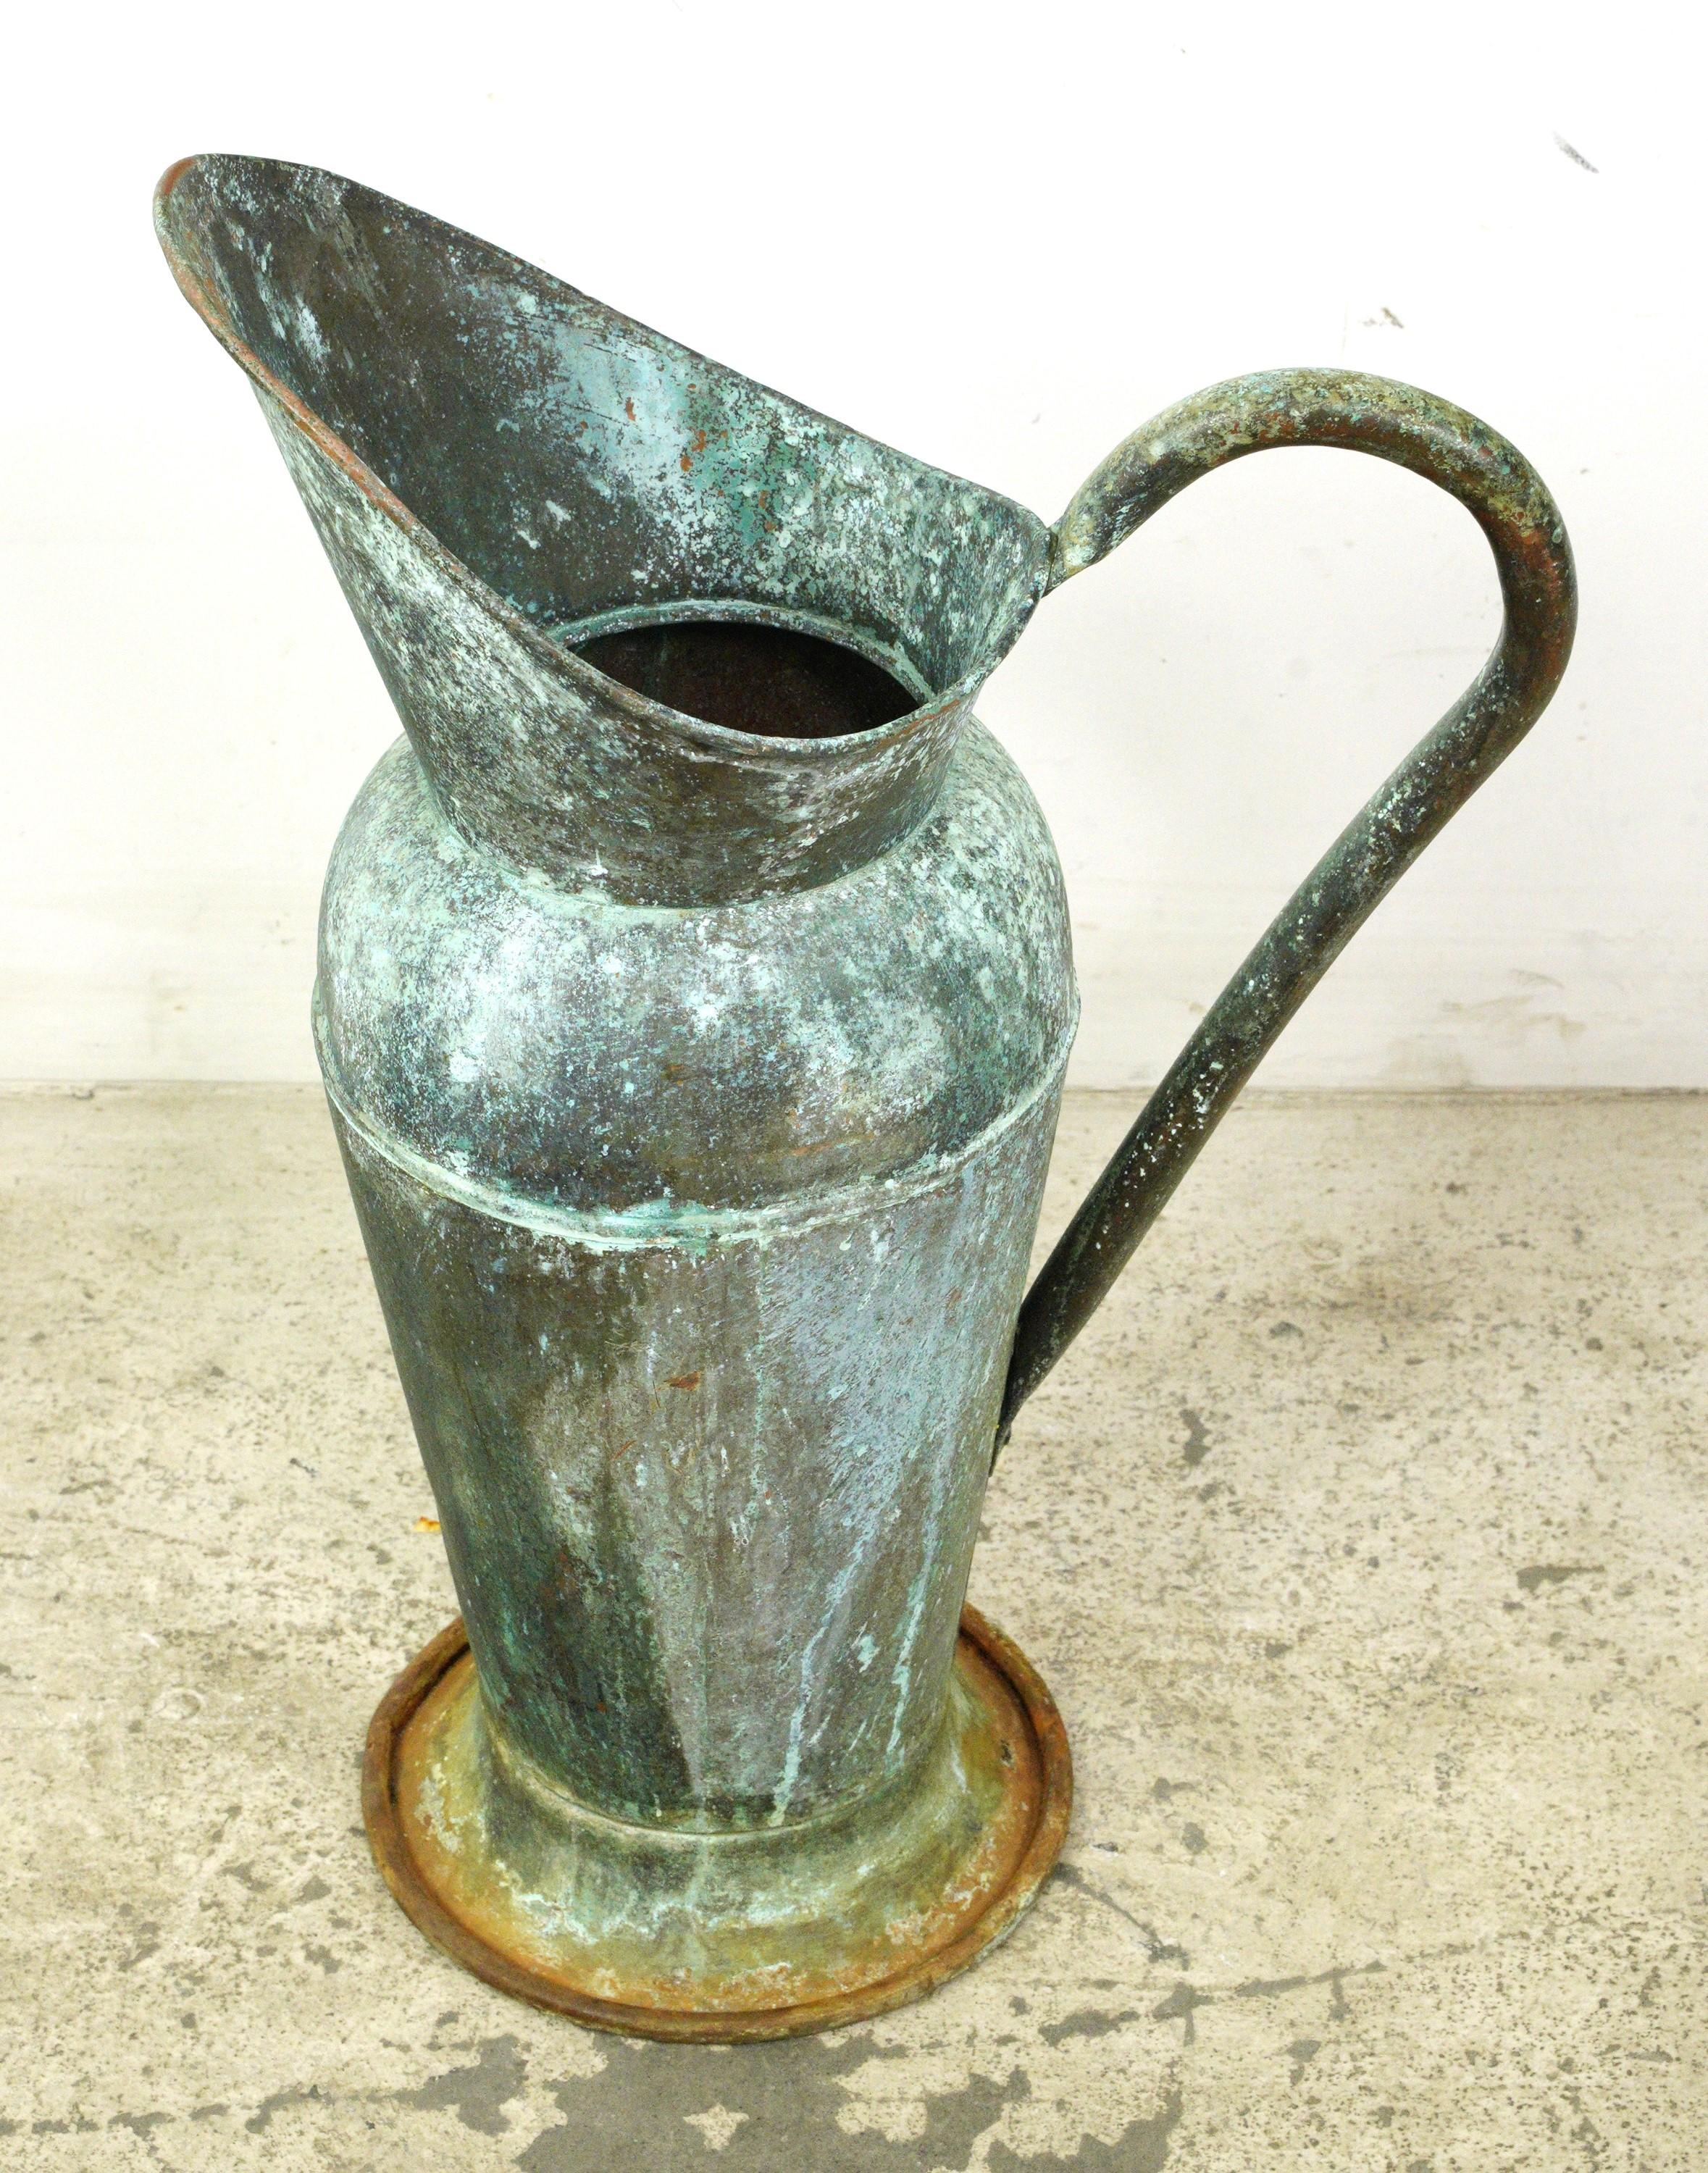 Early 20th Century copper jug with a verdigris patina. Good condition with appropriate wear from age. One available. Please note, this item is located in one of our NYC locations.